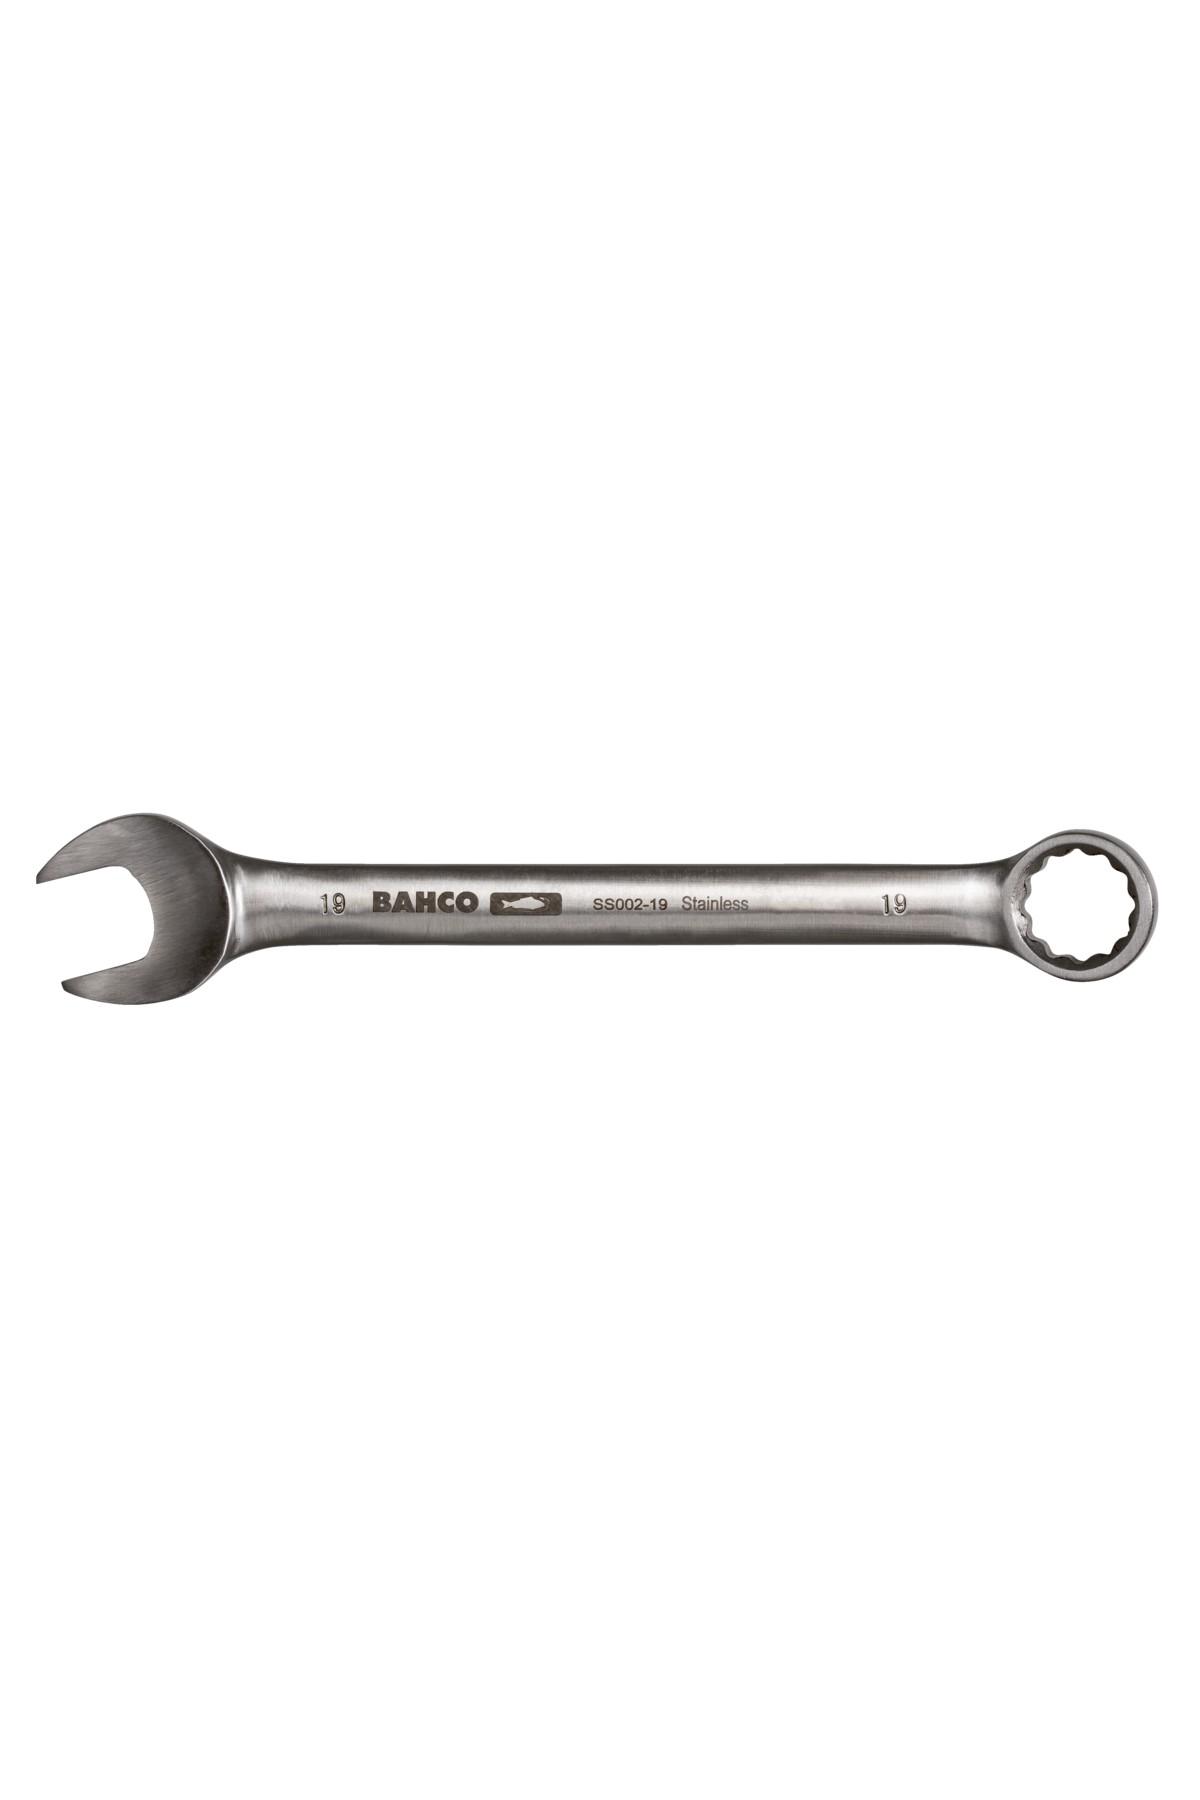 Ring spanner stainless steel 24mm